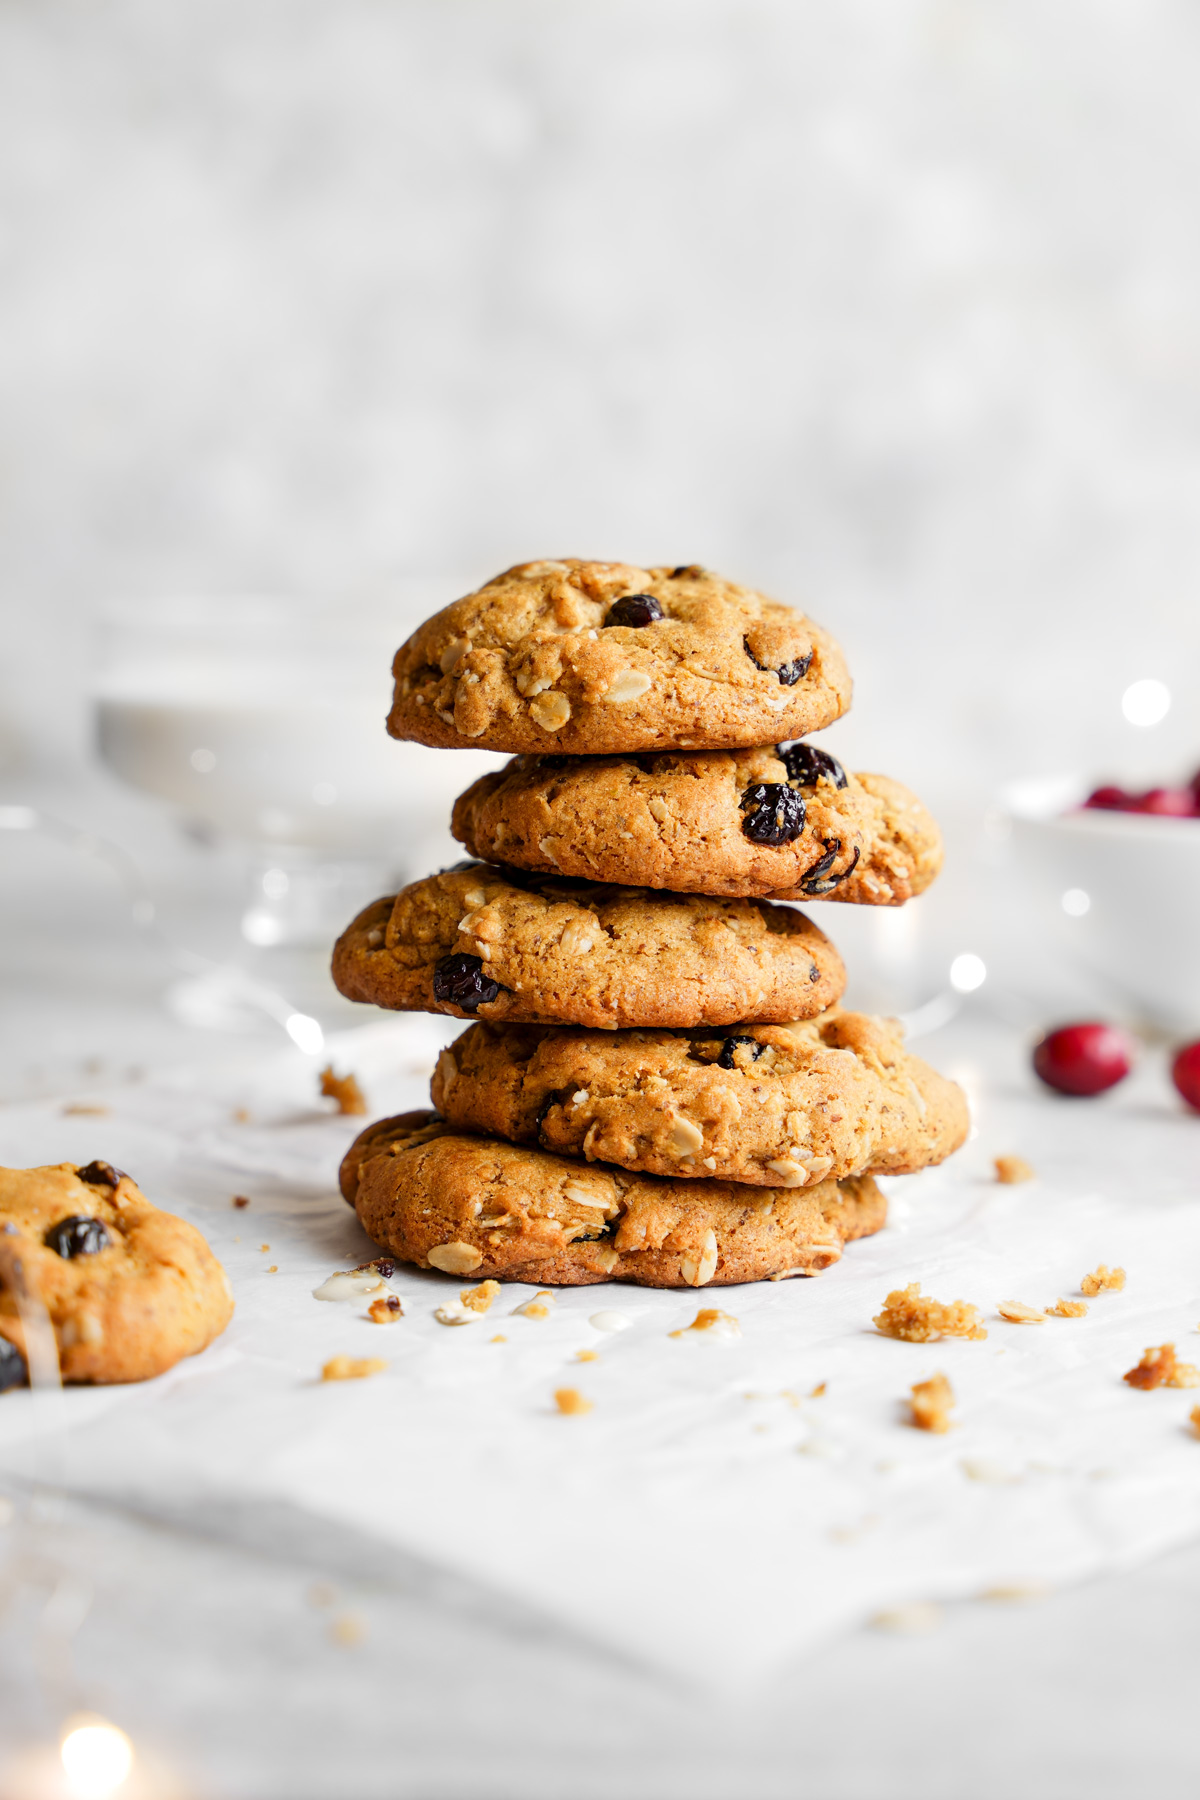 the cookies stacked on top of each other with crumbs and fresh cranberries around them